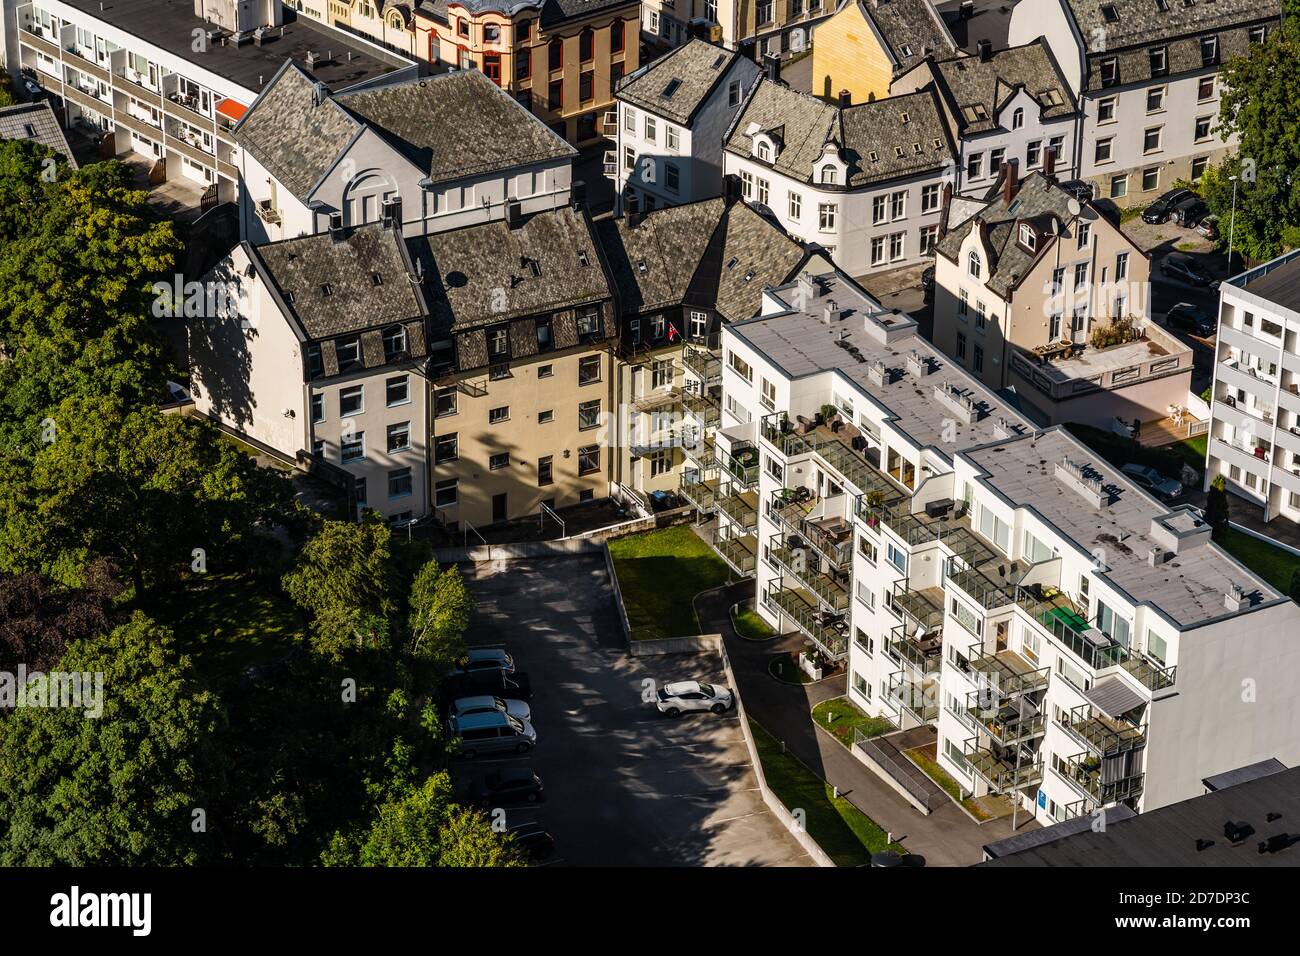 Aerial view of a distric of Ålesund Norway on a sunny day in the late summer Stock Photo